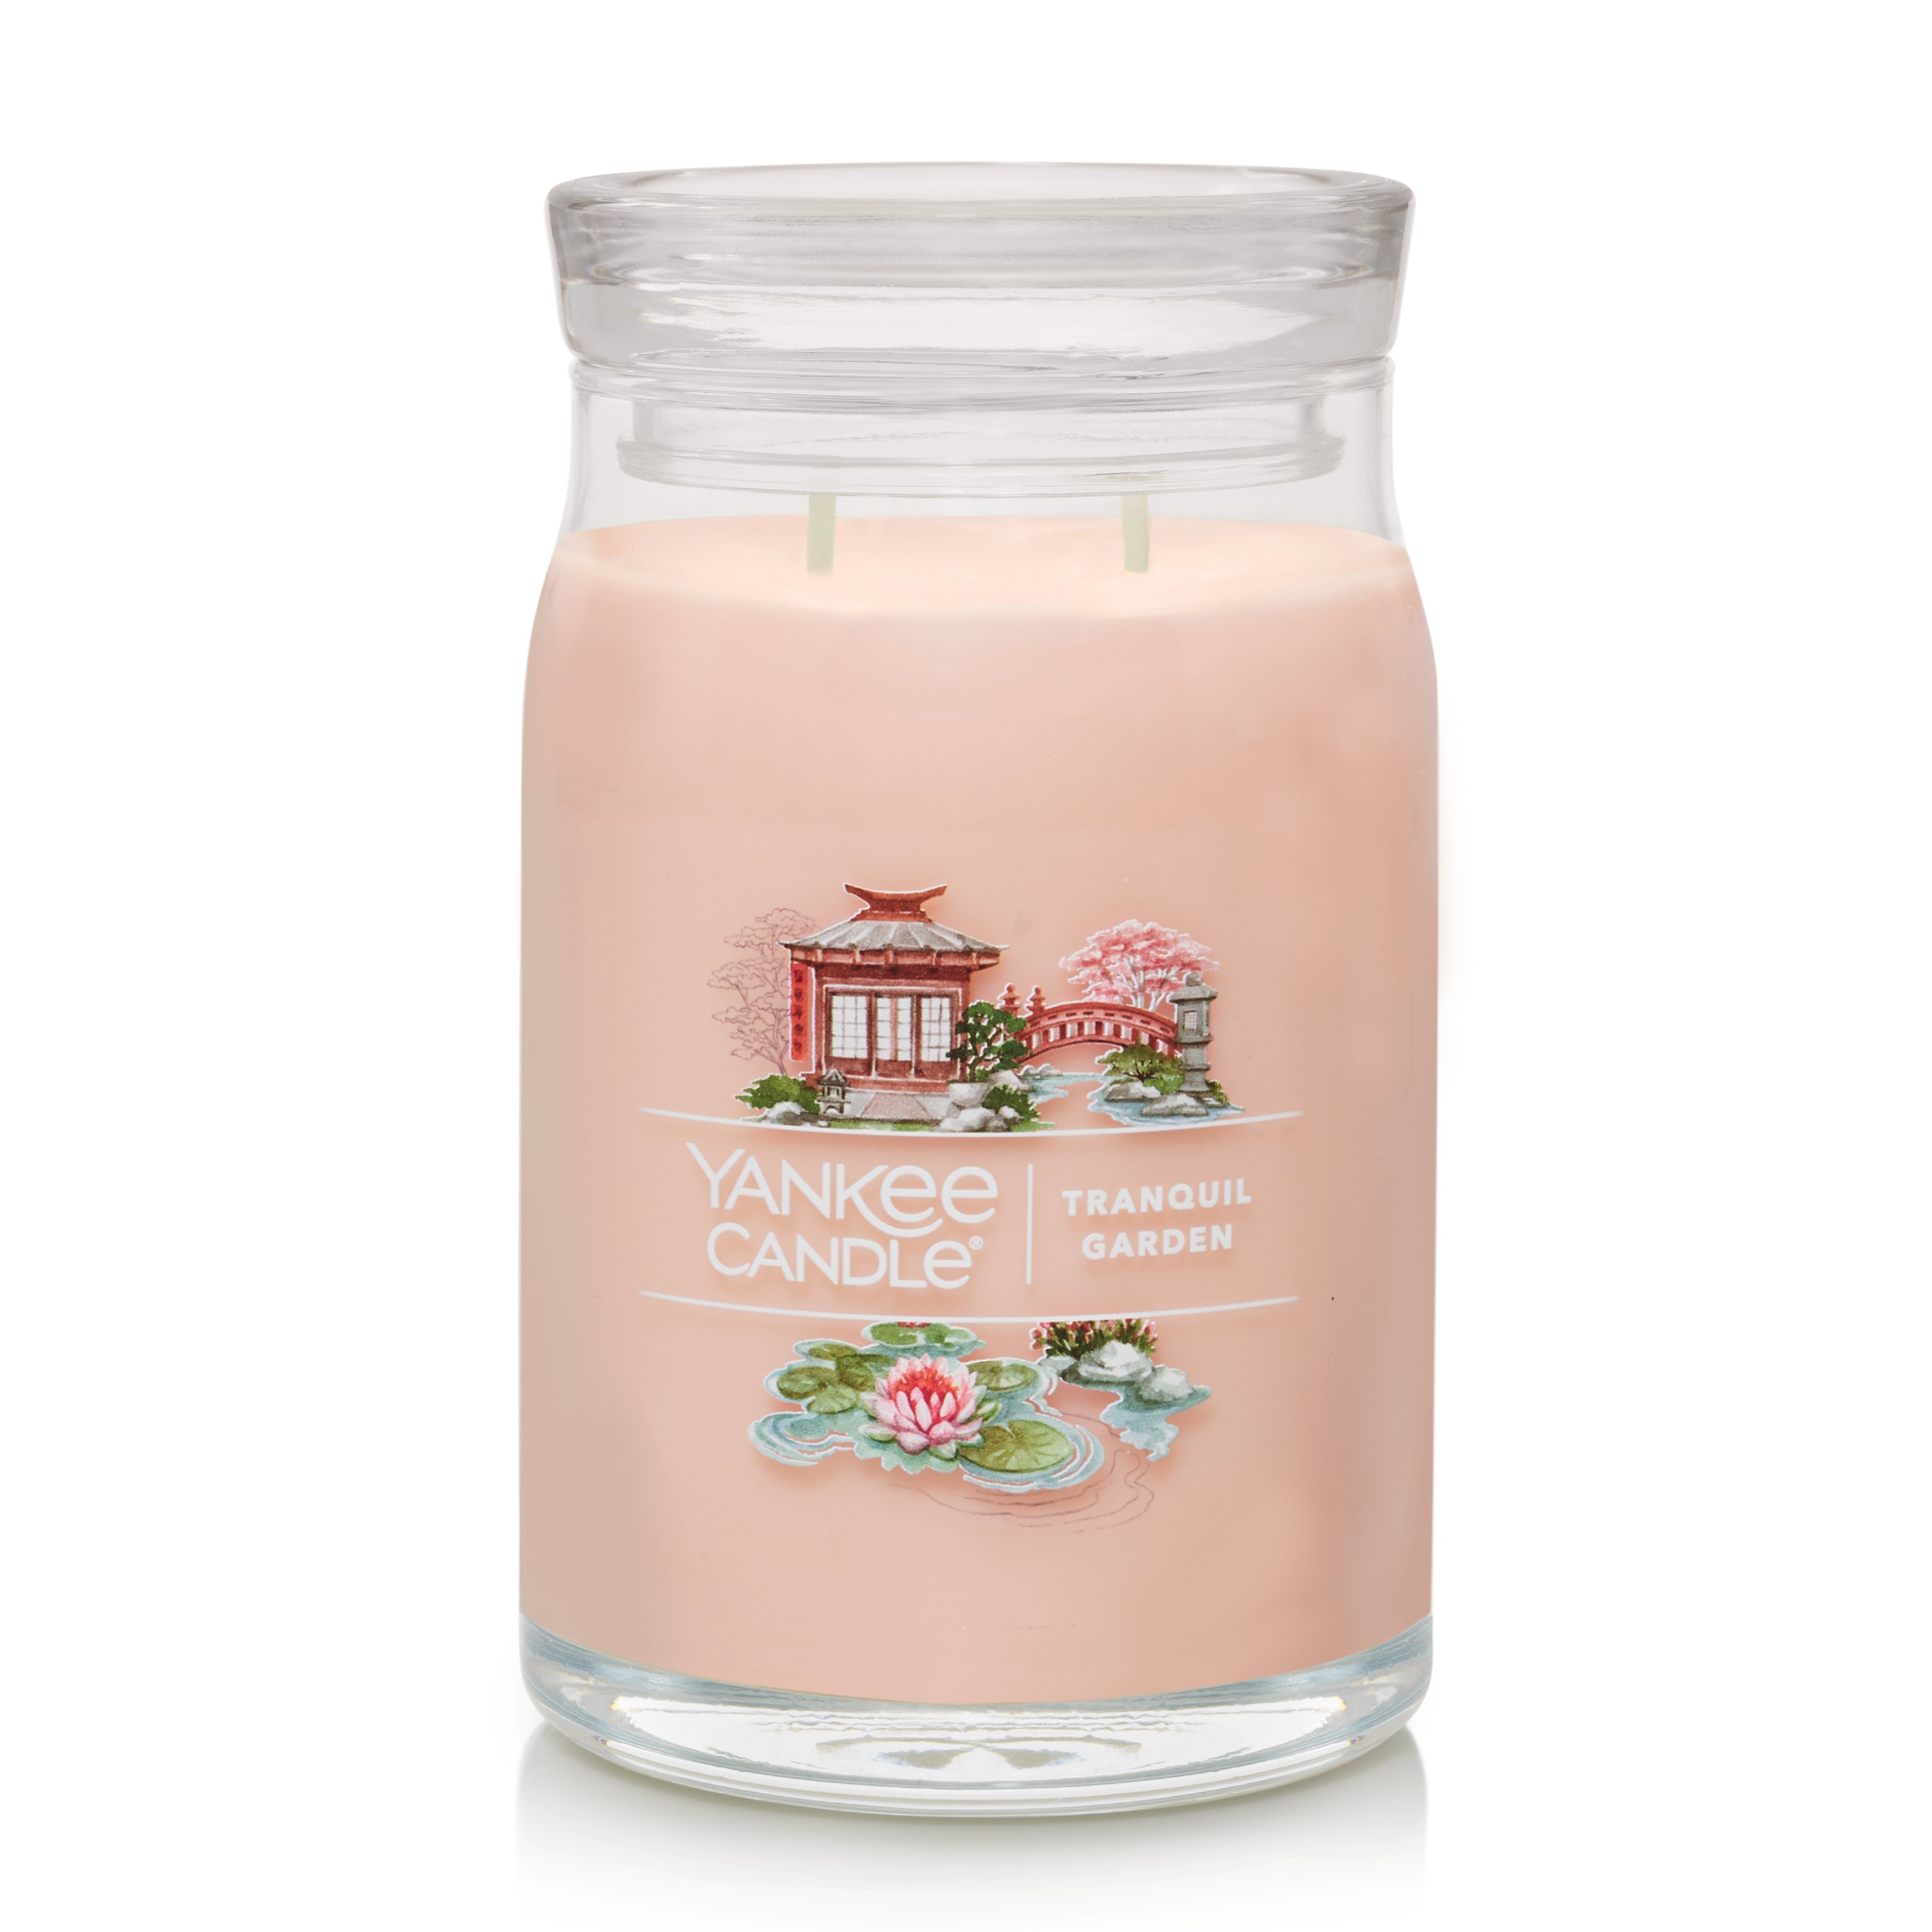 Tranquil Garden Yankee Candle® Signature Large Jar Candles - Signature  Large Jar Candles